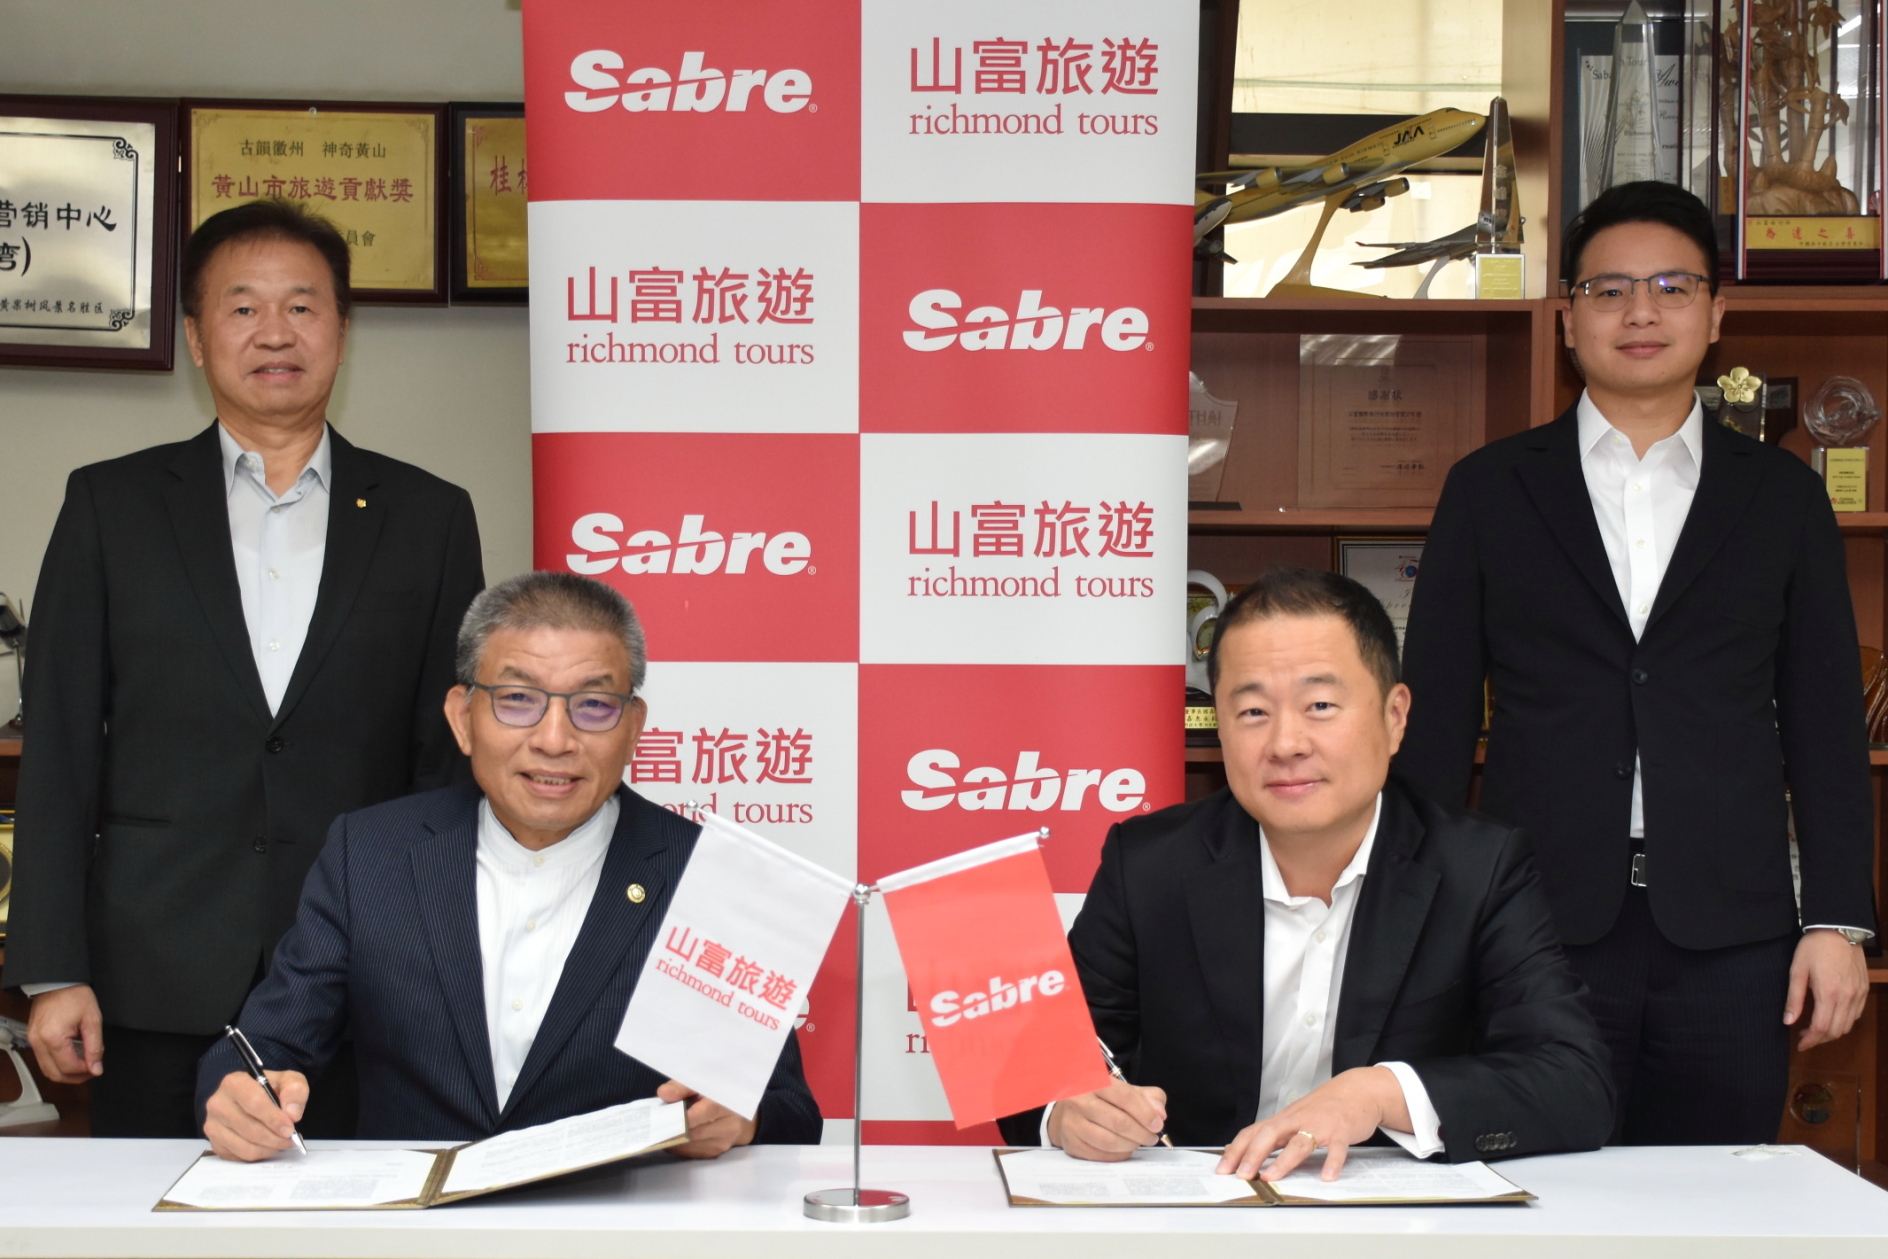 From left: Simon Lee, GM - Sabre Taiwan; Chico K.S. Chen, Chairman, Richmond Tours; Charles Lee, Regional Director, Sabre Asia Pacific; and Richi Chen, CIO, Richmond Tours.. Click to enlarge.